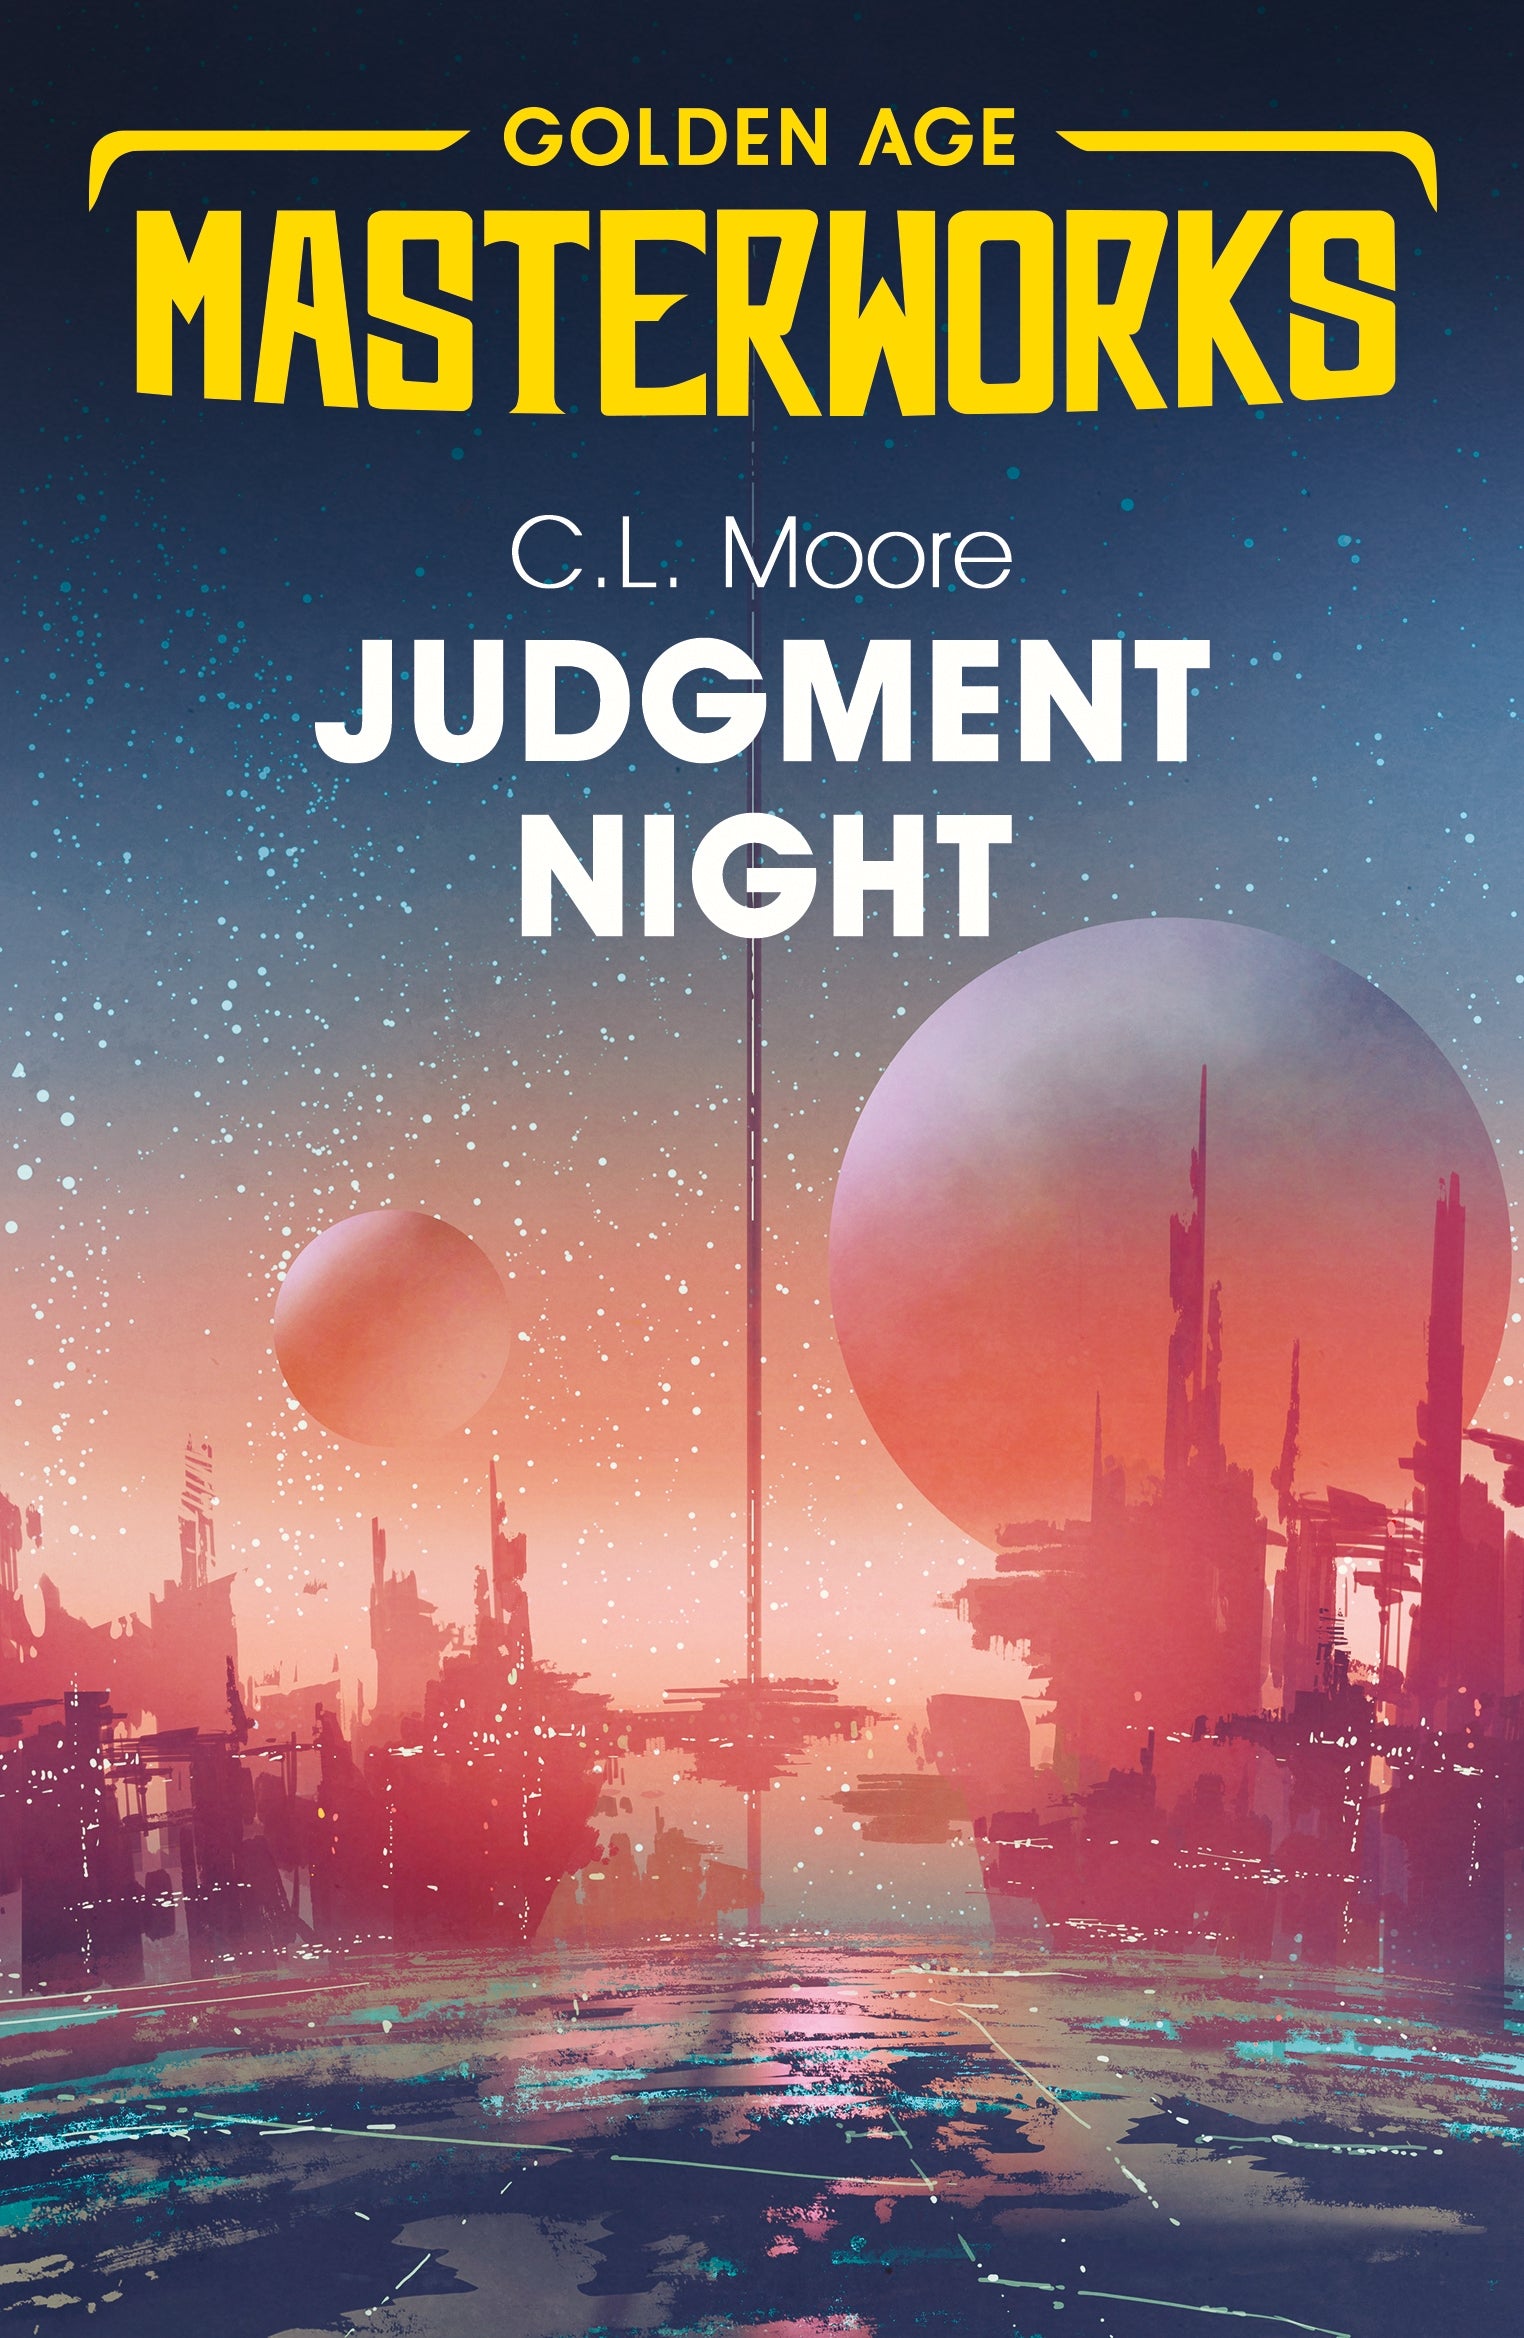 Judgment Night: A Selection of Science Fiction by C.L. Moore